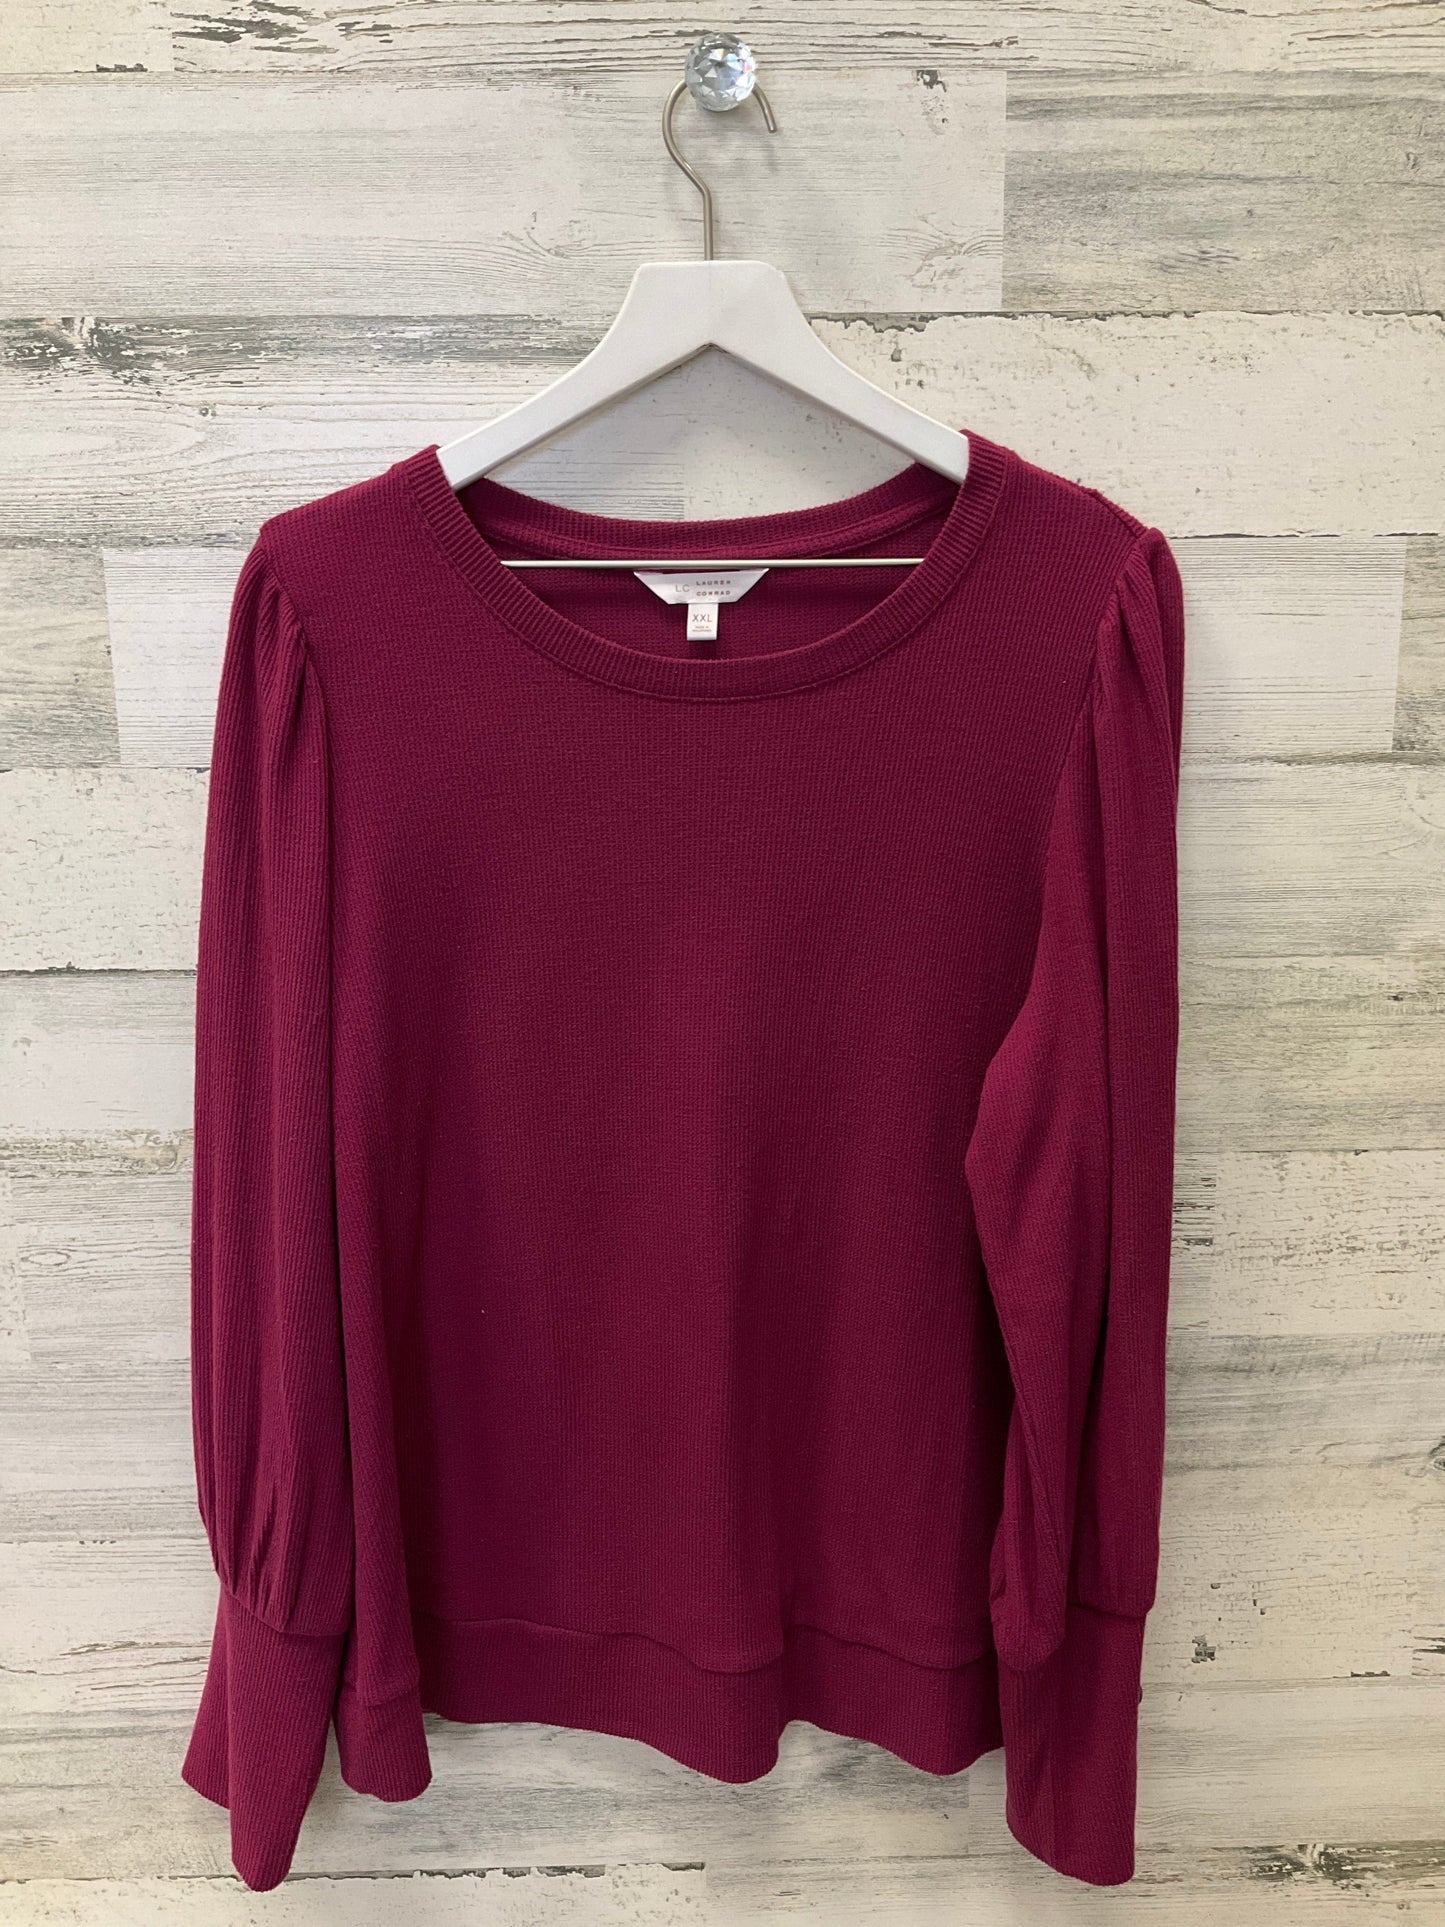 Top Long Sleeve By Lc Lauren Conrad  Size: 2x